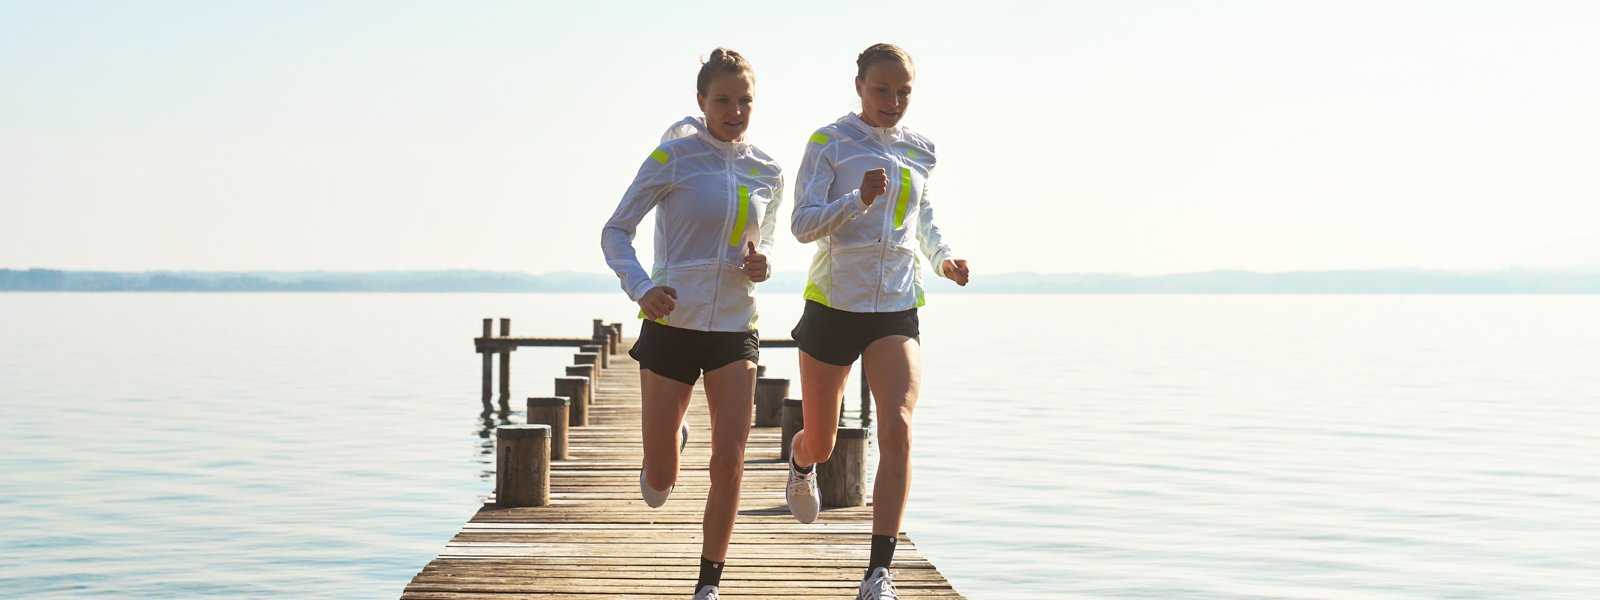 Two runners in white running jackets and with short pants run over a jetty towards the bank